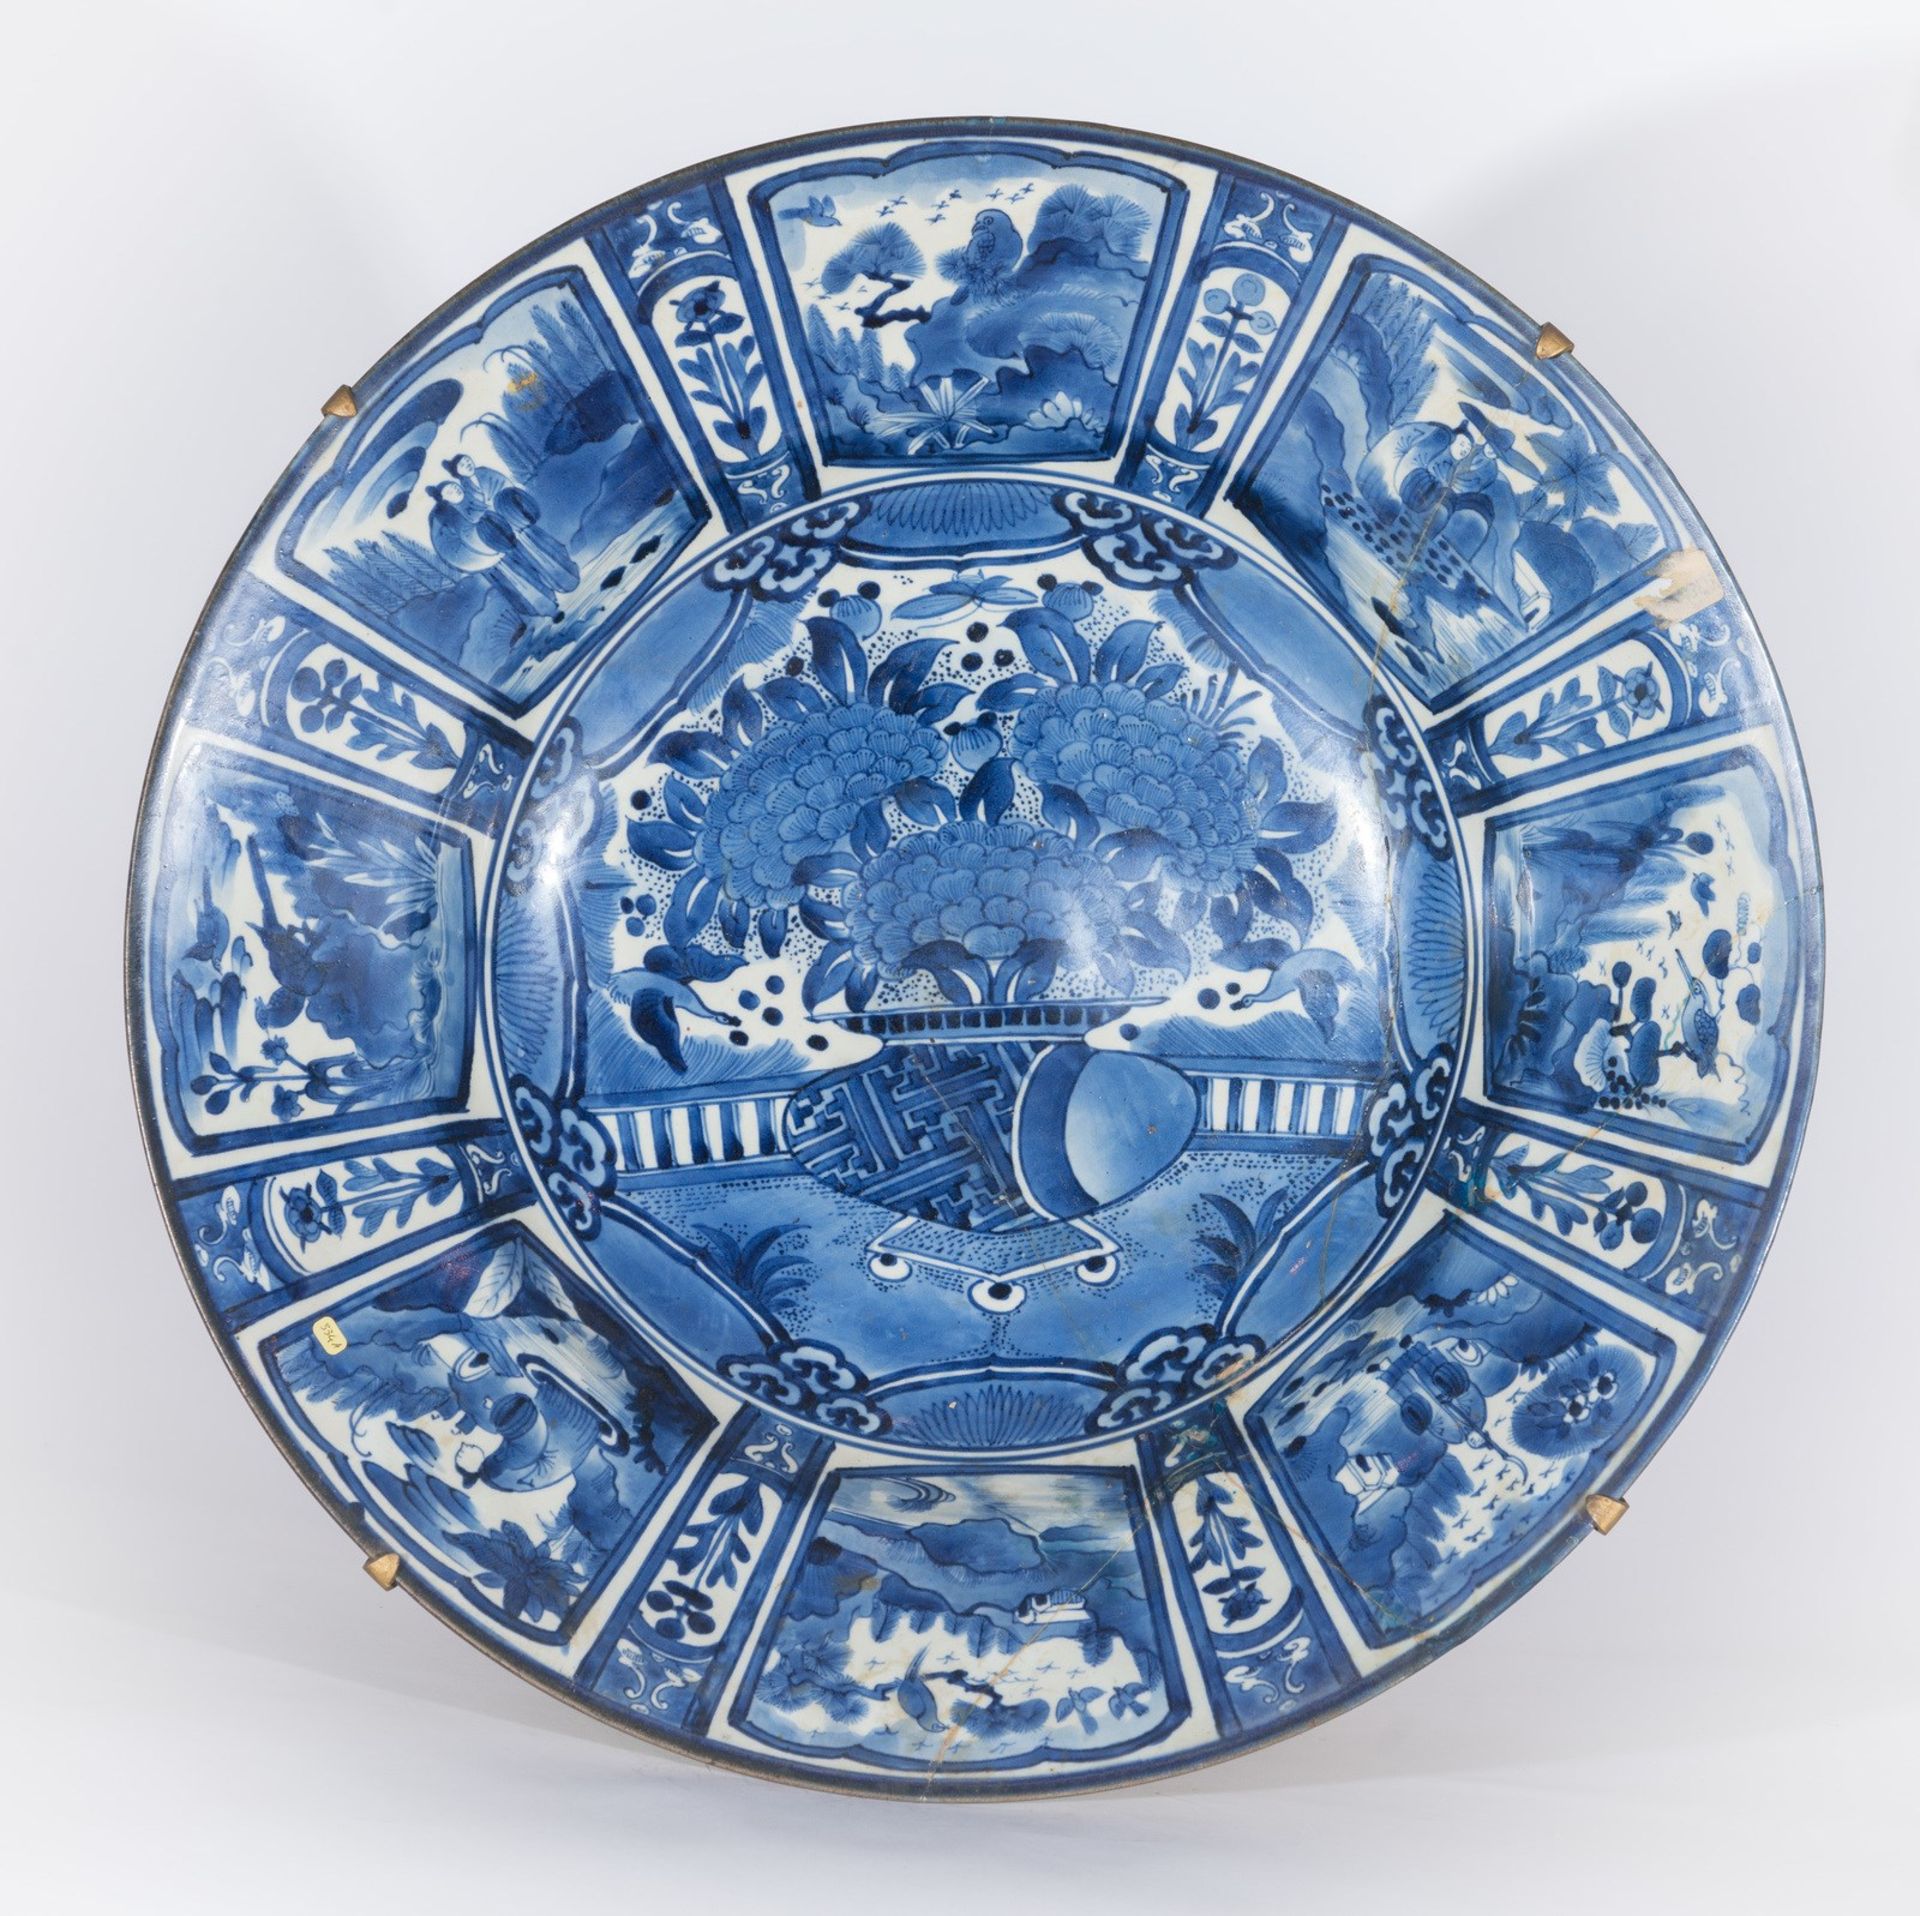 ARTE GIAPPONESE A large blue and white arita porcelain tray painted with vegetal motifs and charact